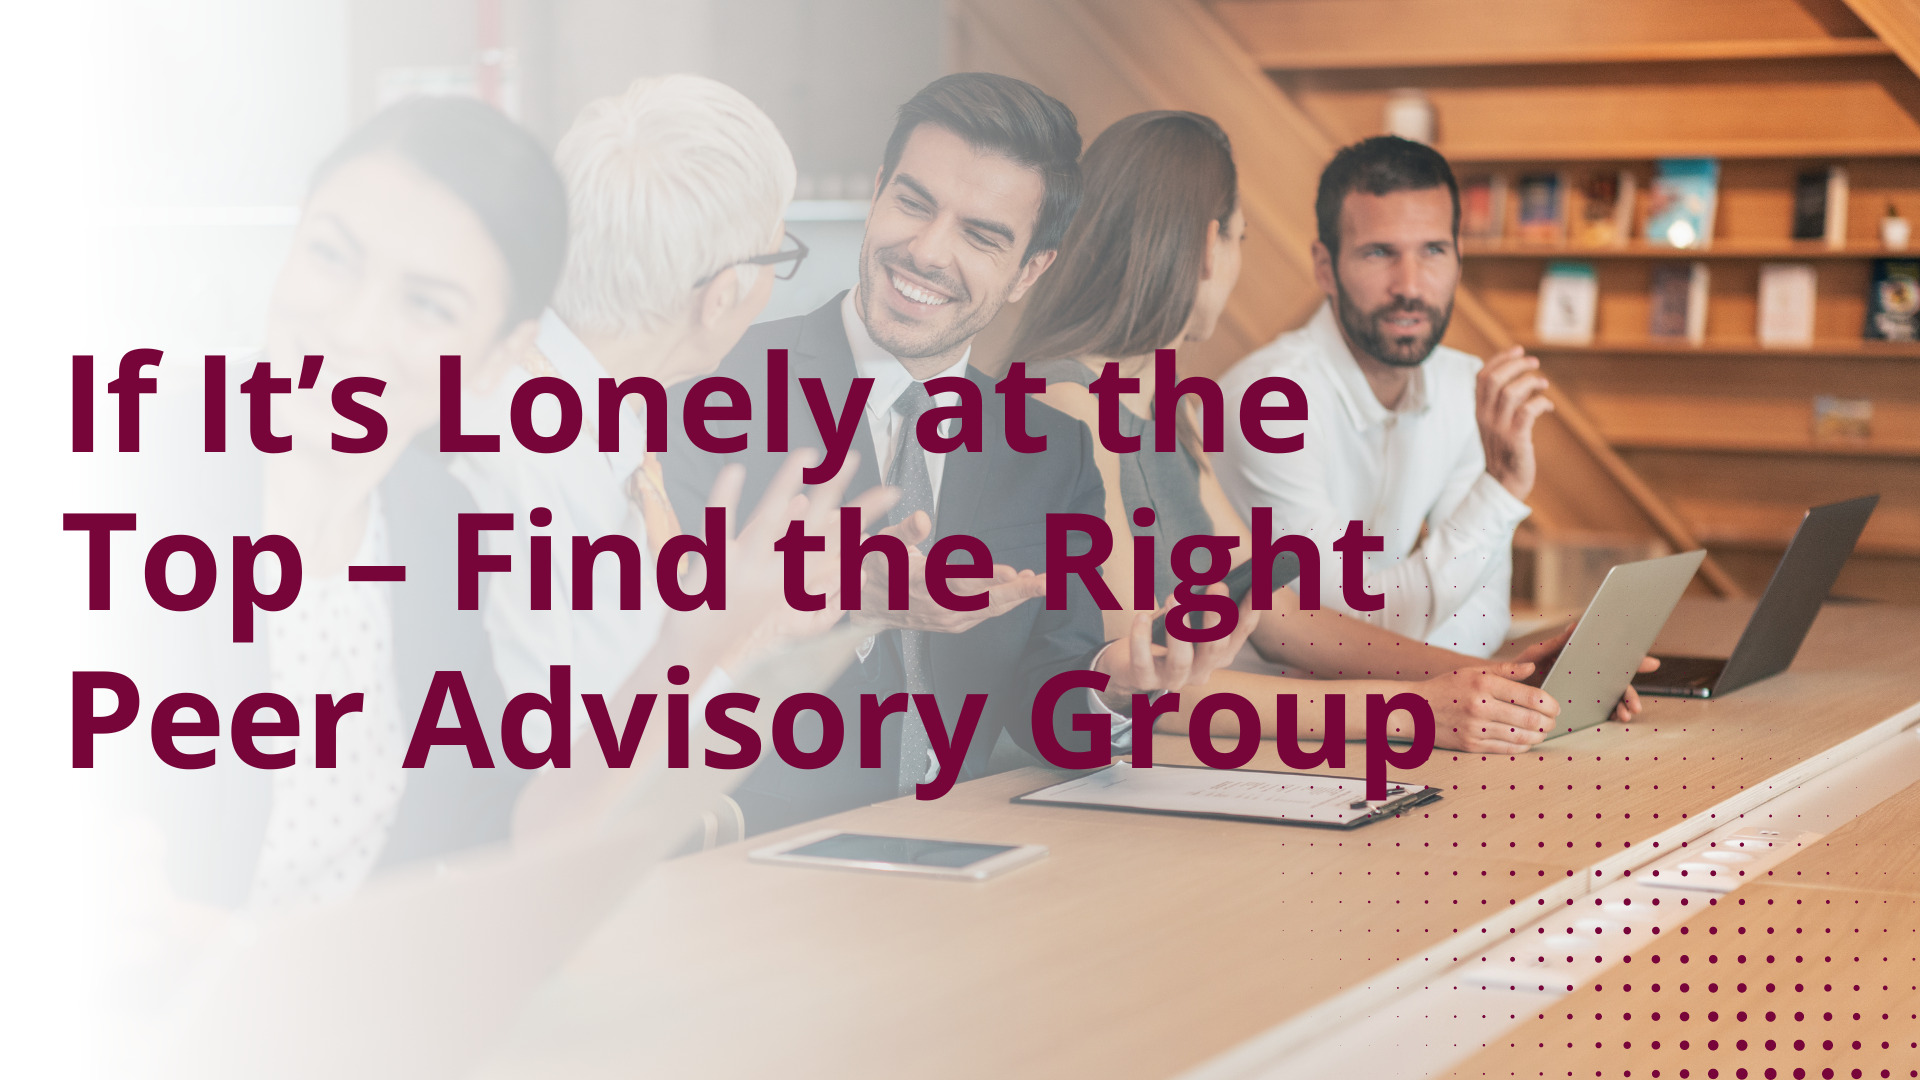 When it's lonely at the top: find the right peer advisory group